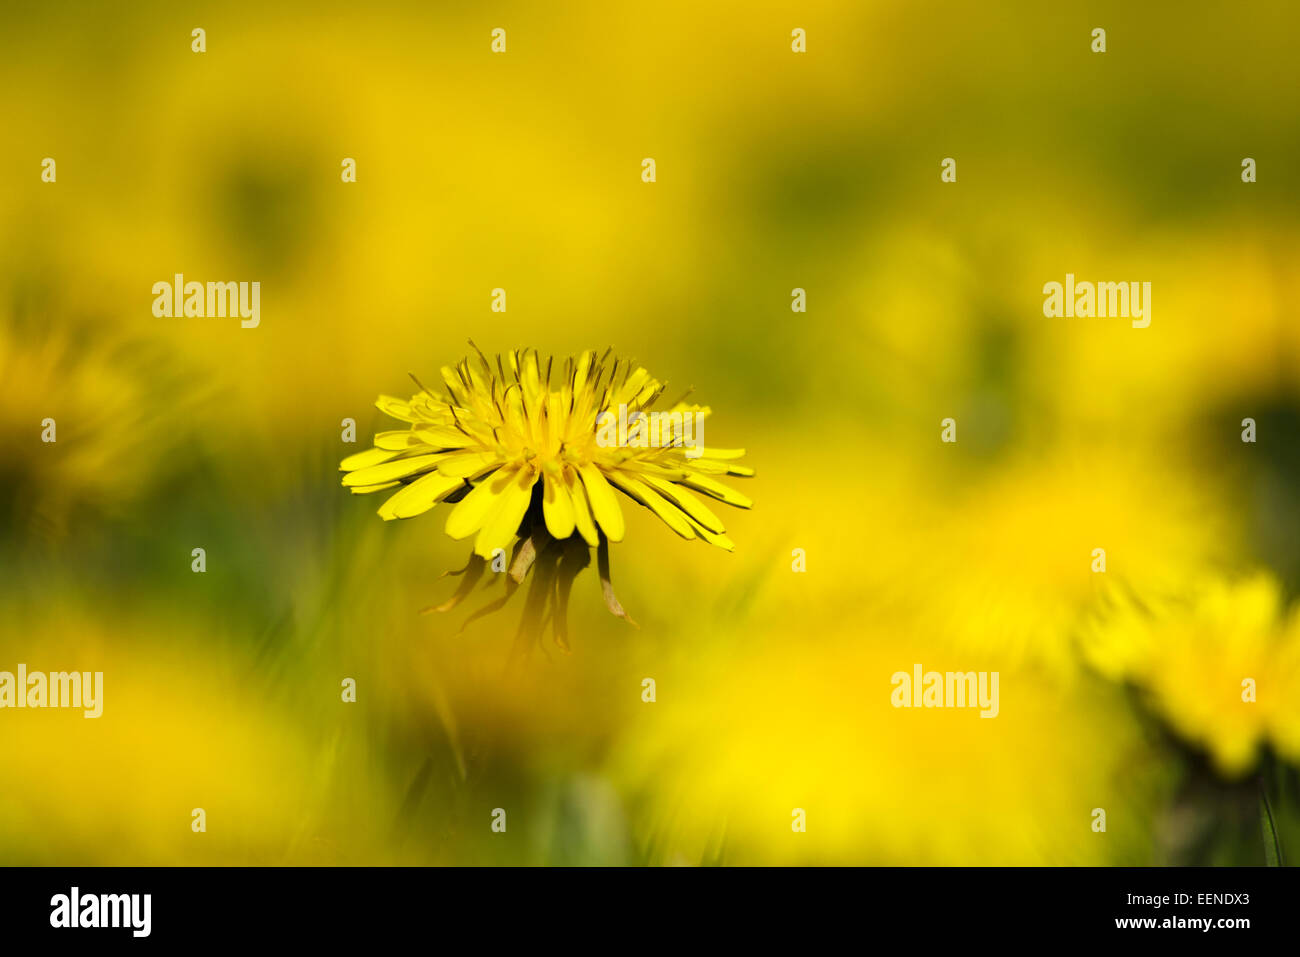 Dandelion flower close up isolated on yellow background. Stock Photo